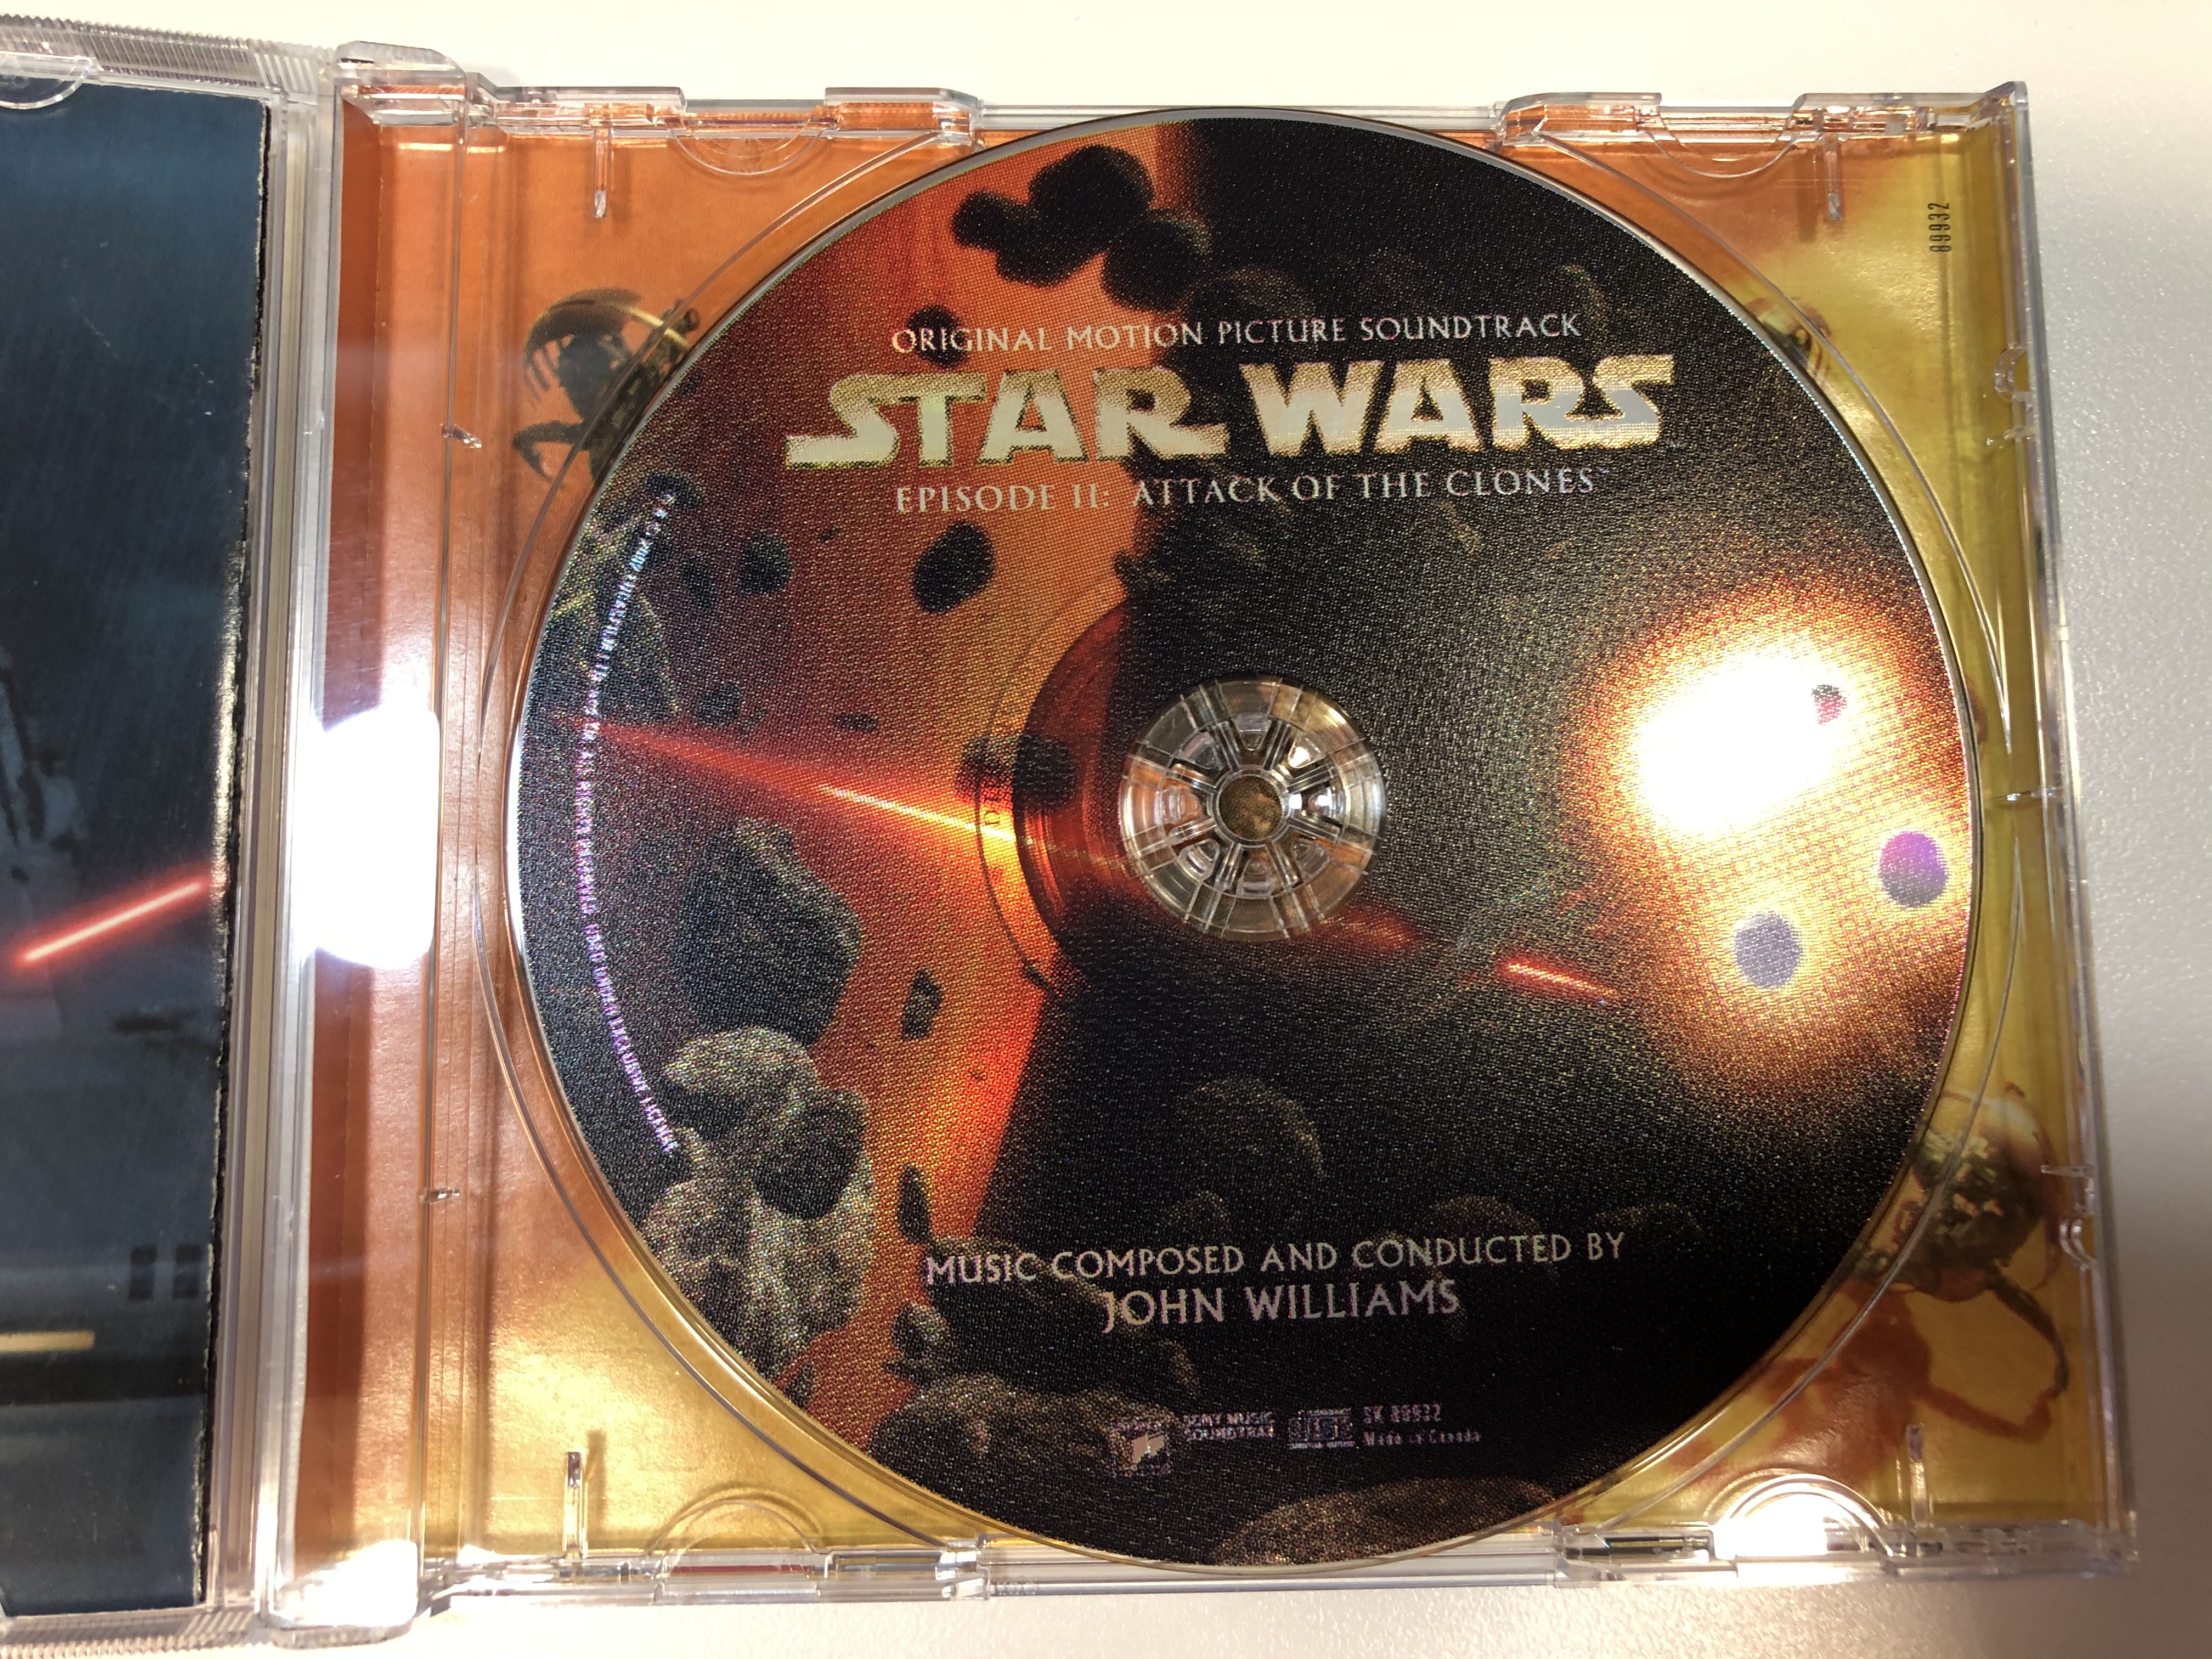 star-wars-episode-ii-attack-of-the-clones-original-motion-picture-soundtrack-music-composed-and-conducted-by-john-williams-sony-classical-audio-cd-2002-sk-89932-3-.jpg